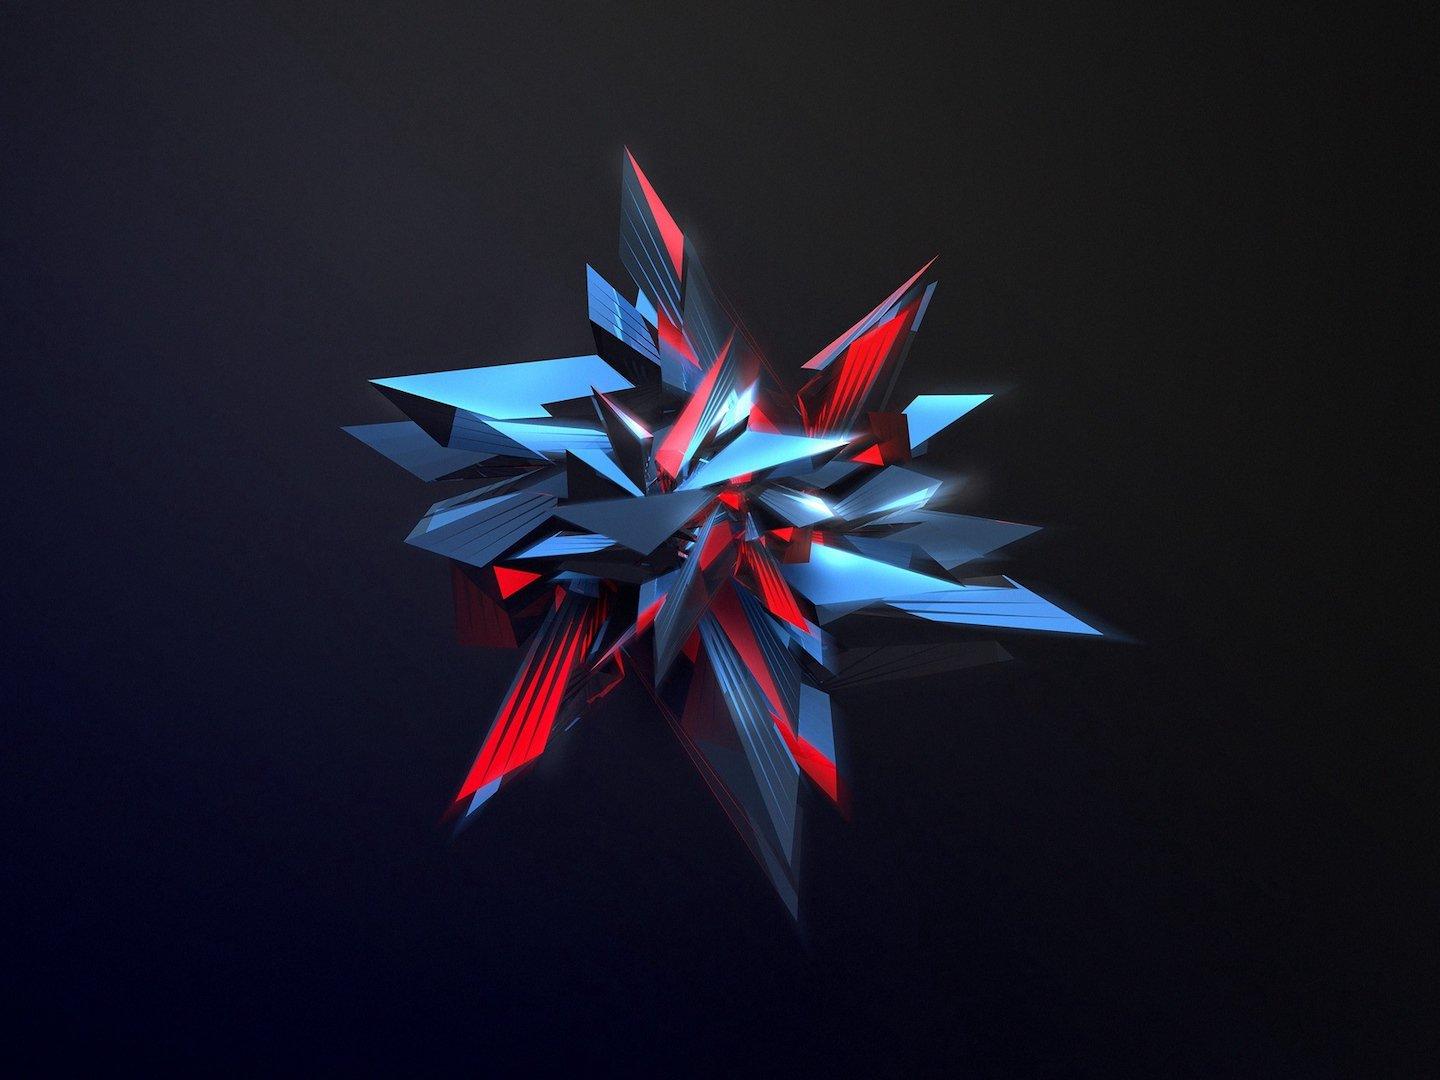 20 Creative abstract wallpapers for your smartphone